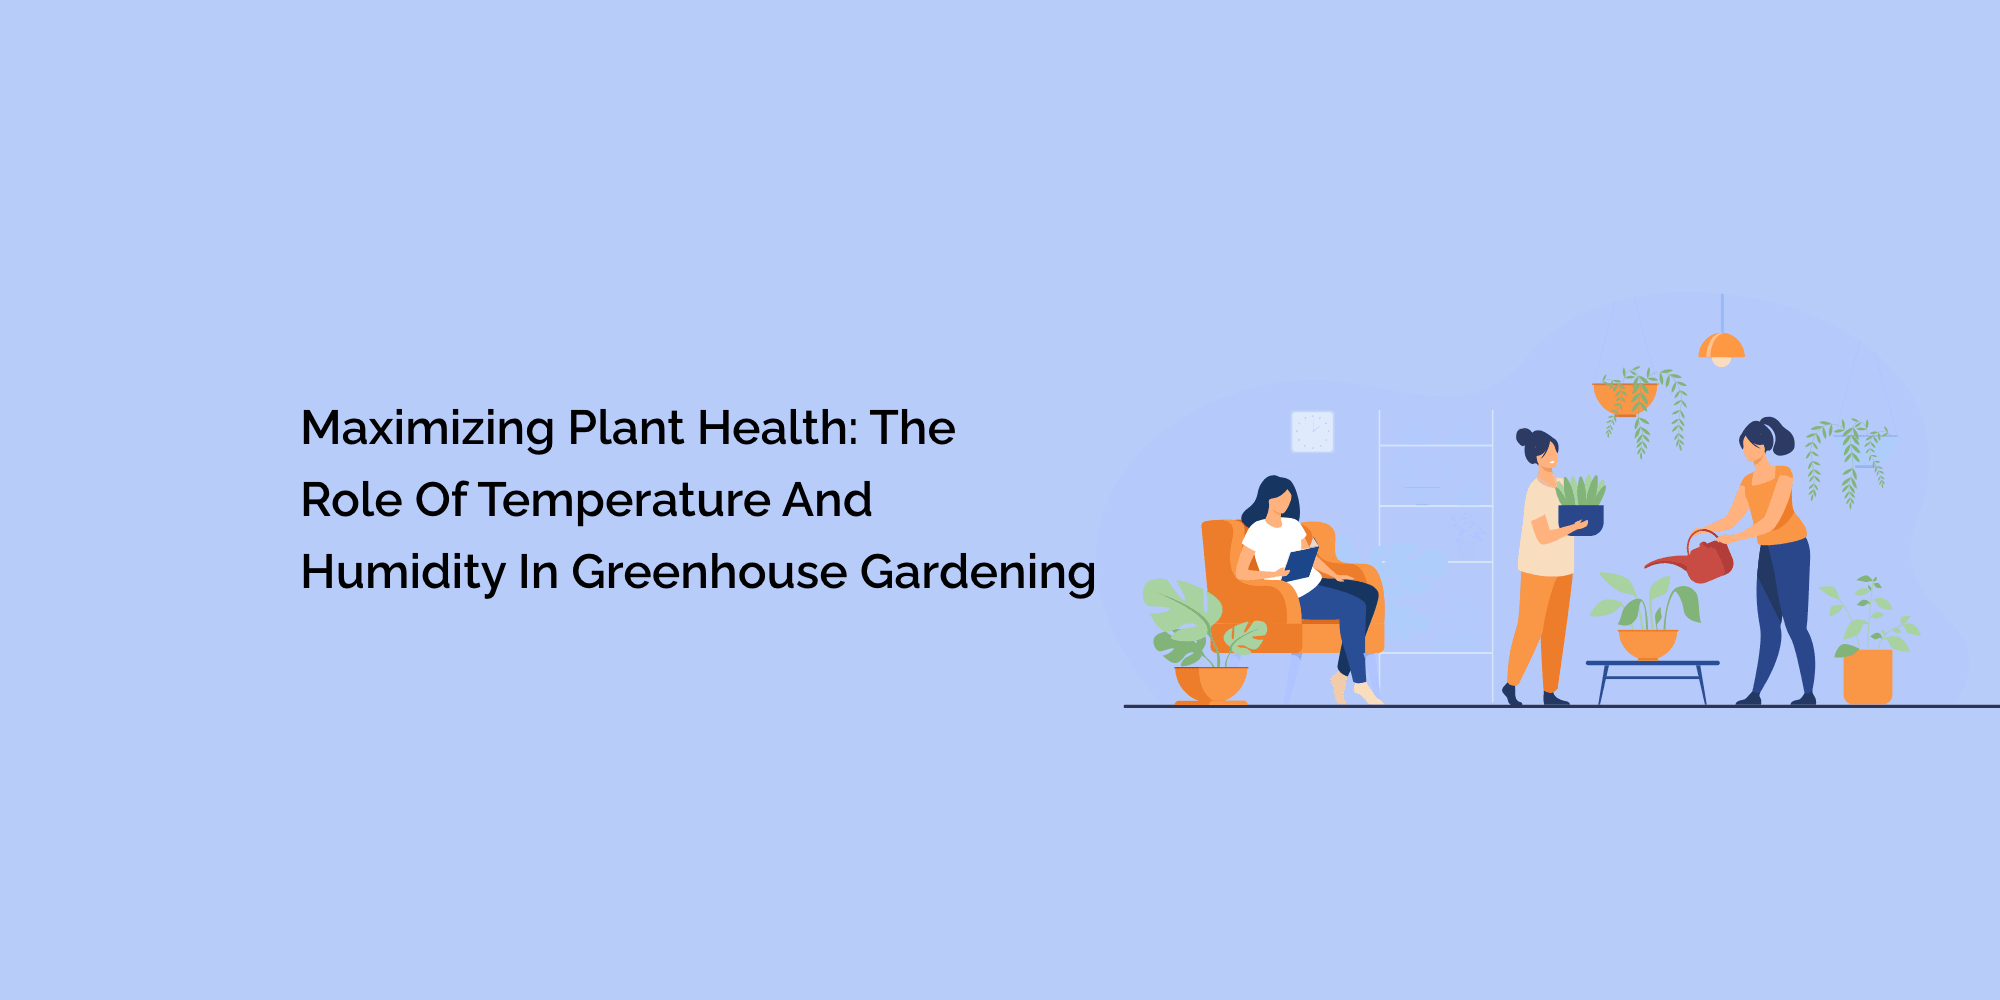 Maximizing Plant Health: The Role of Temperature and Humidity in Greenhouse Gardening